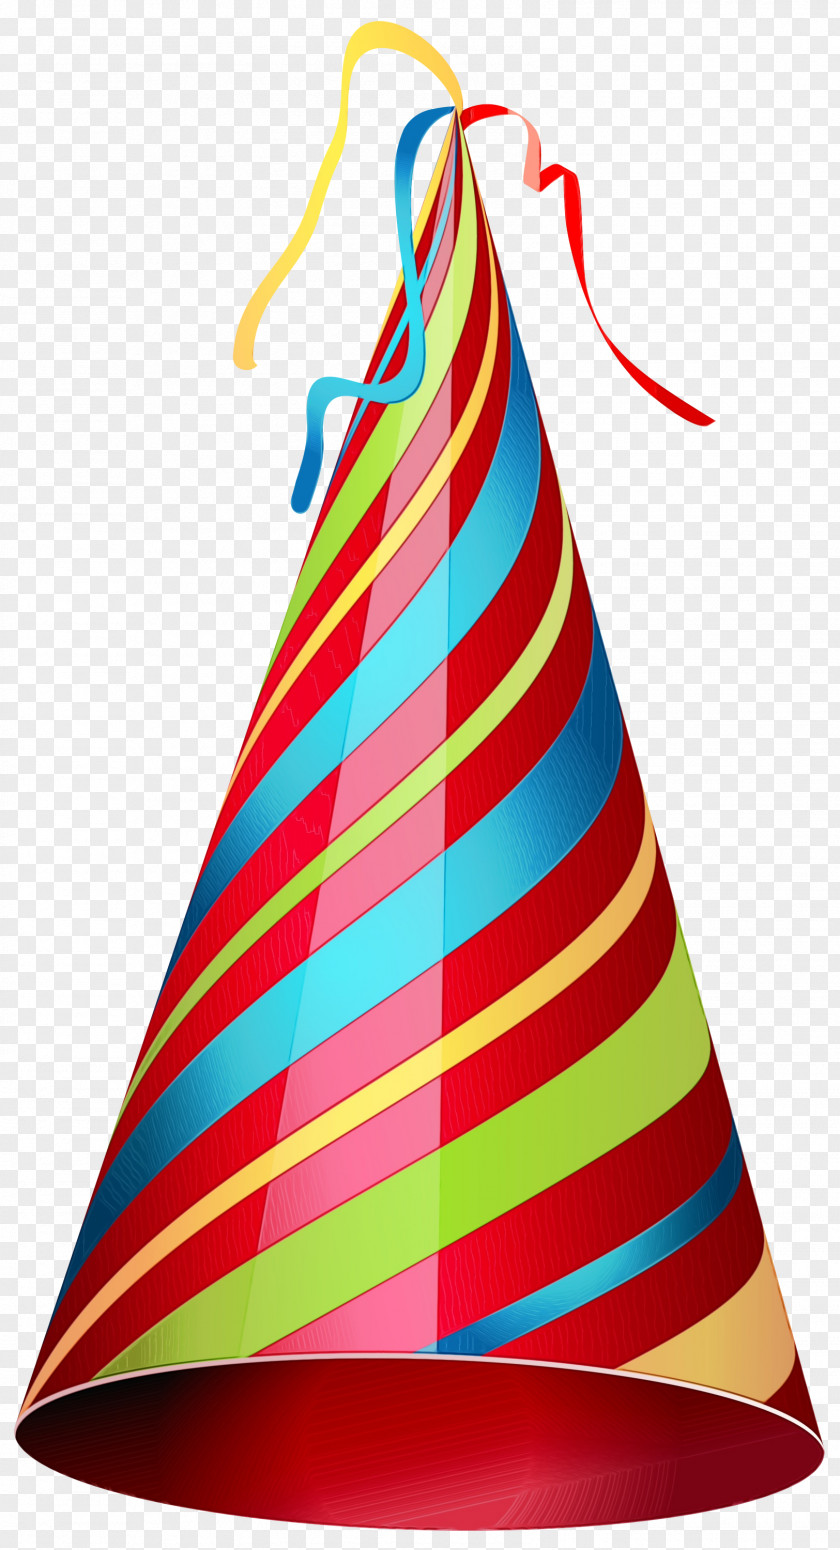 Cone Triangle Cartoon Party Hat PNG